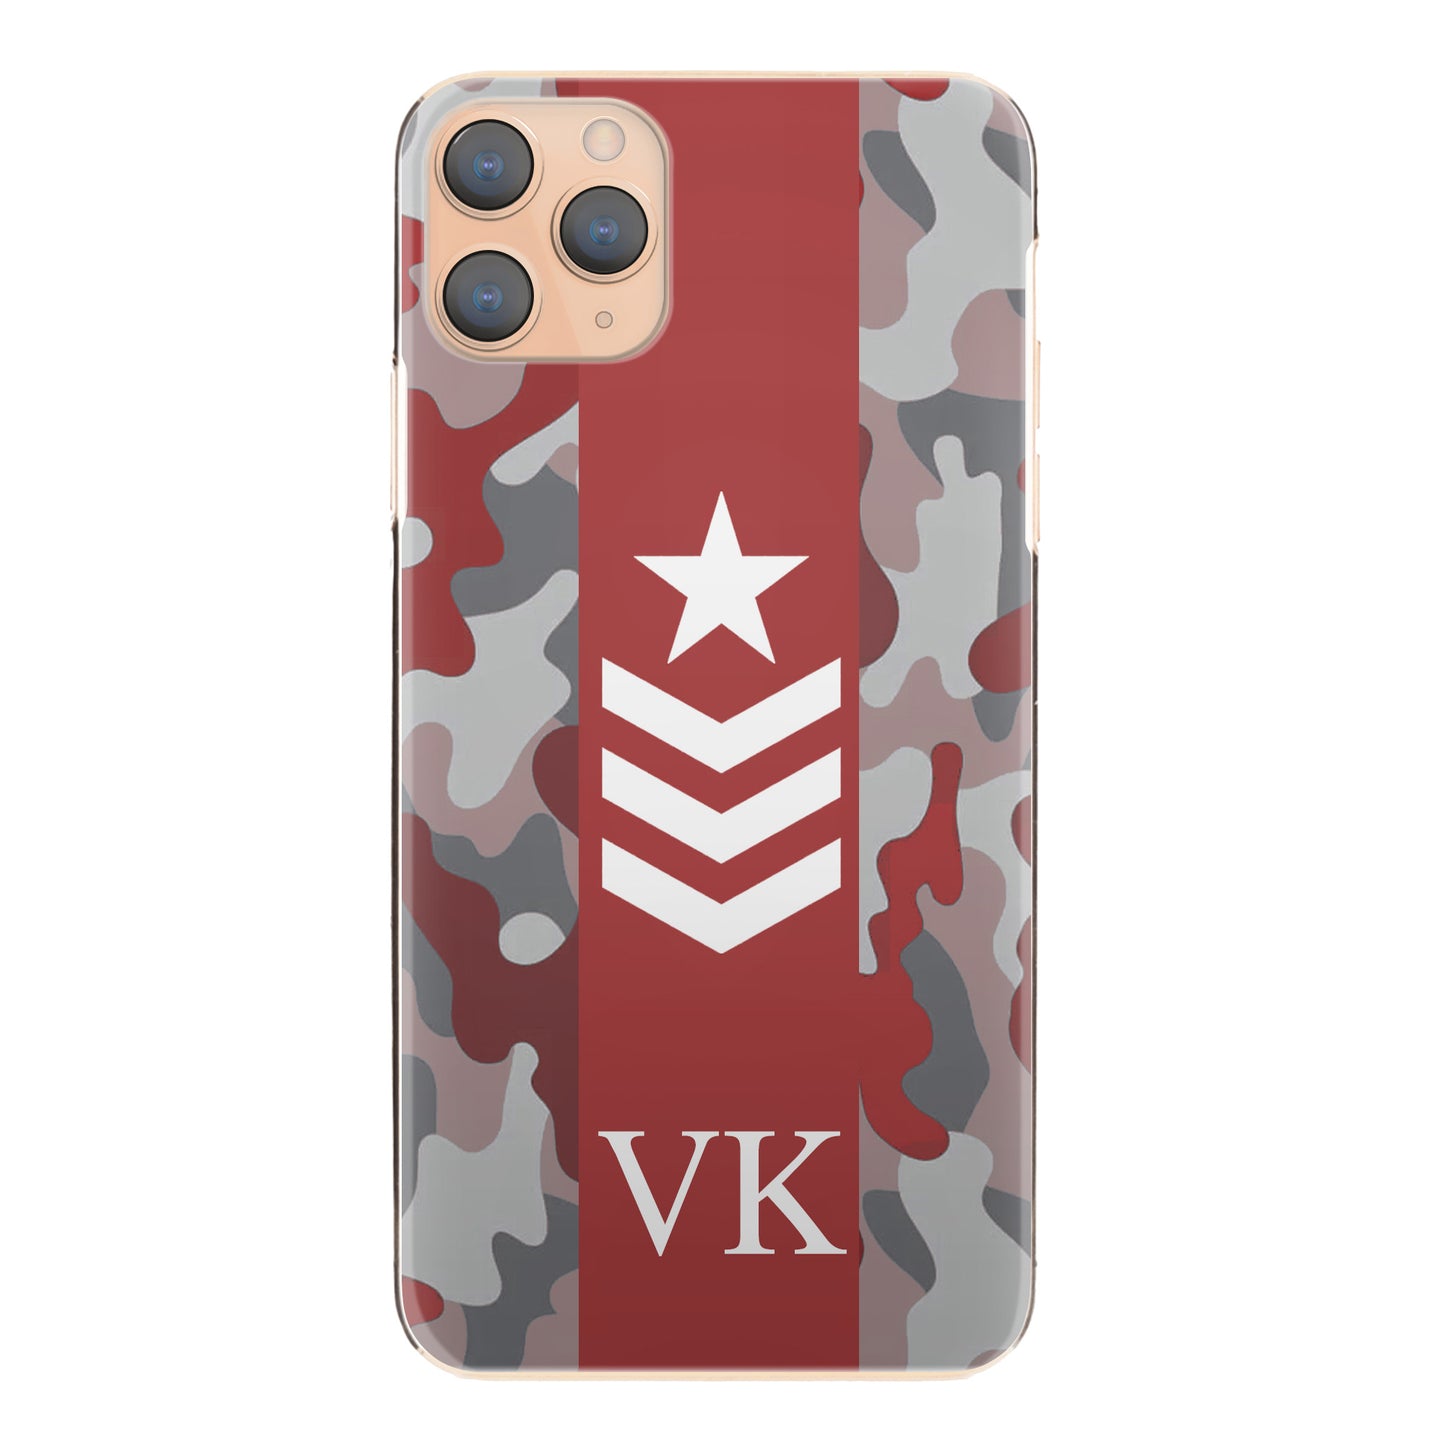 Personalised Samsung Galaxy Phone Hard Case with Initials and Army Rank on Red Camo